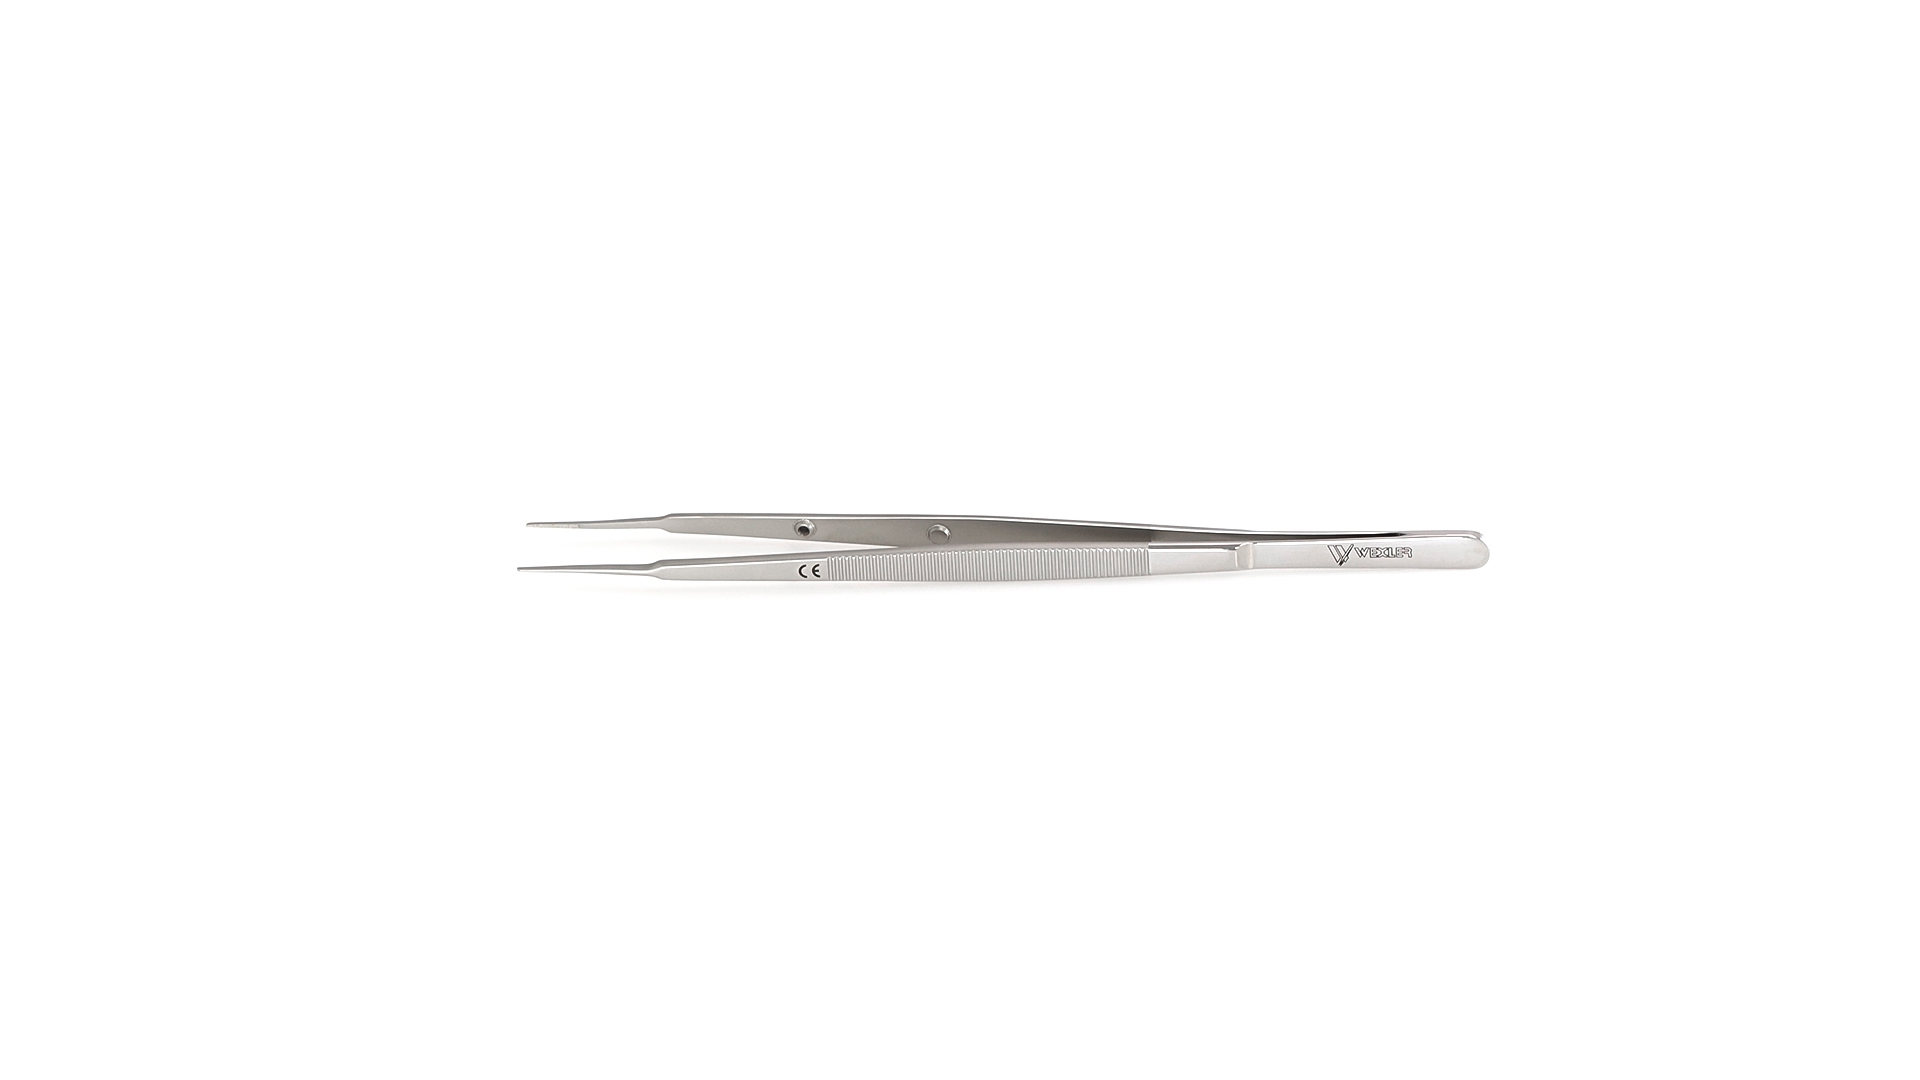 Gerald Forceps - Straight 0.7mm TC coated tips